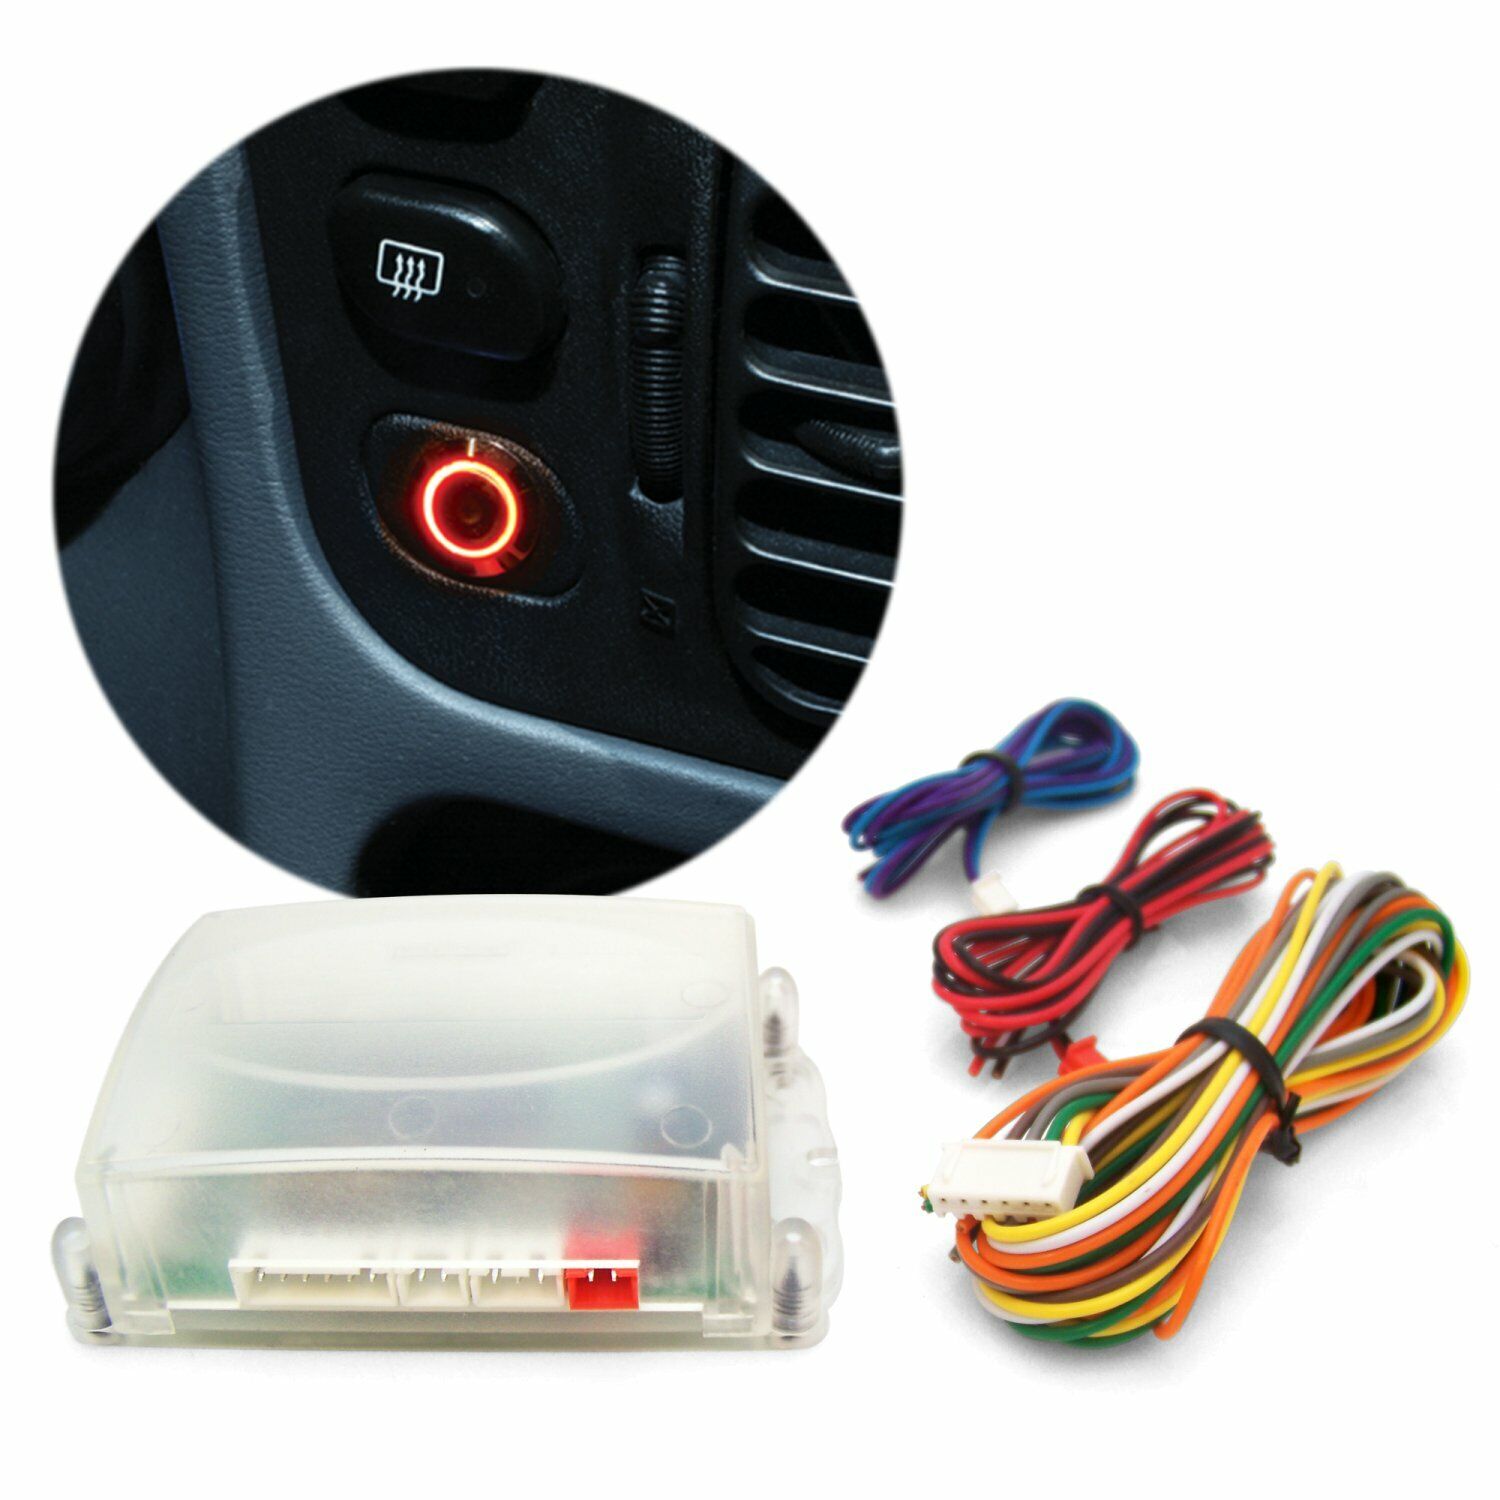 Engine Start Activation Control Unit with TruTouch KICEC0 truck